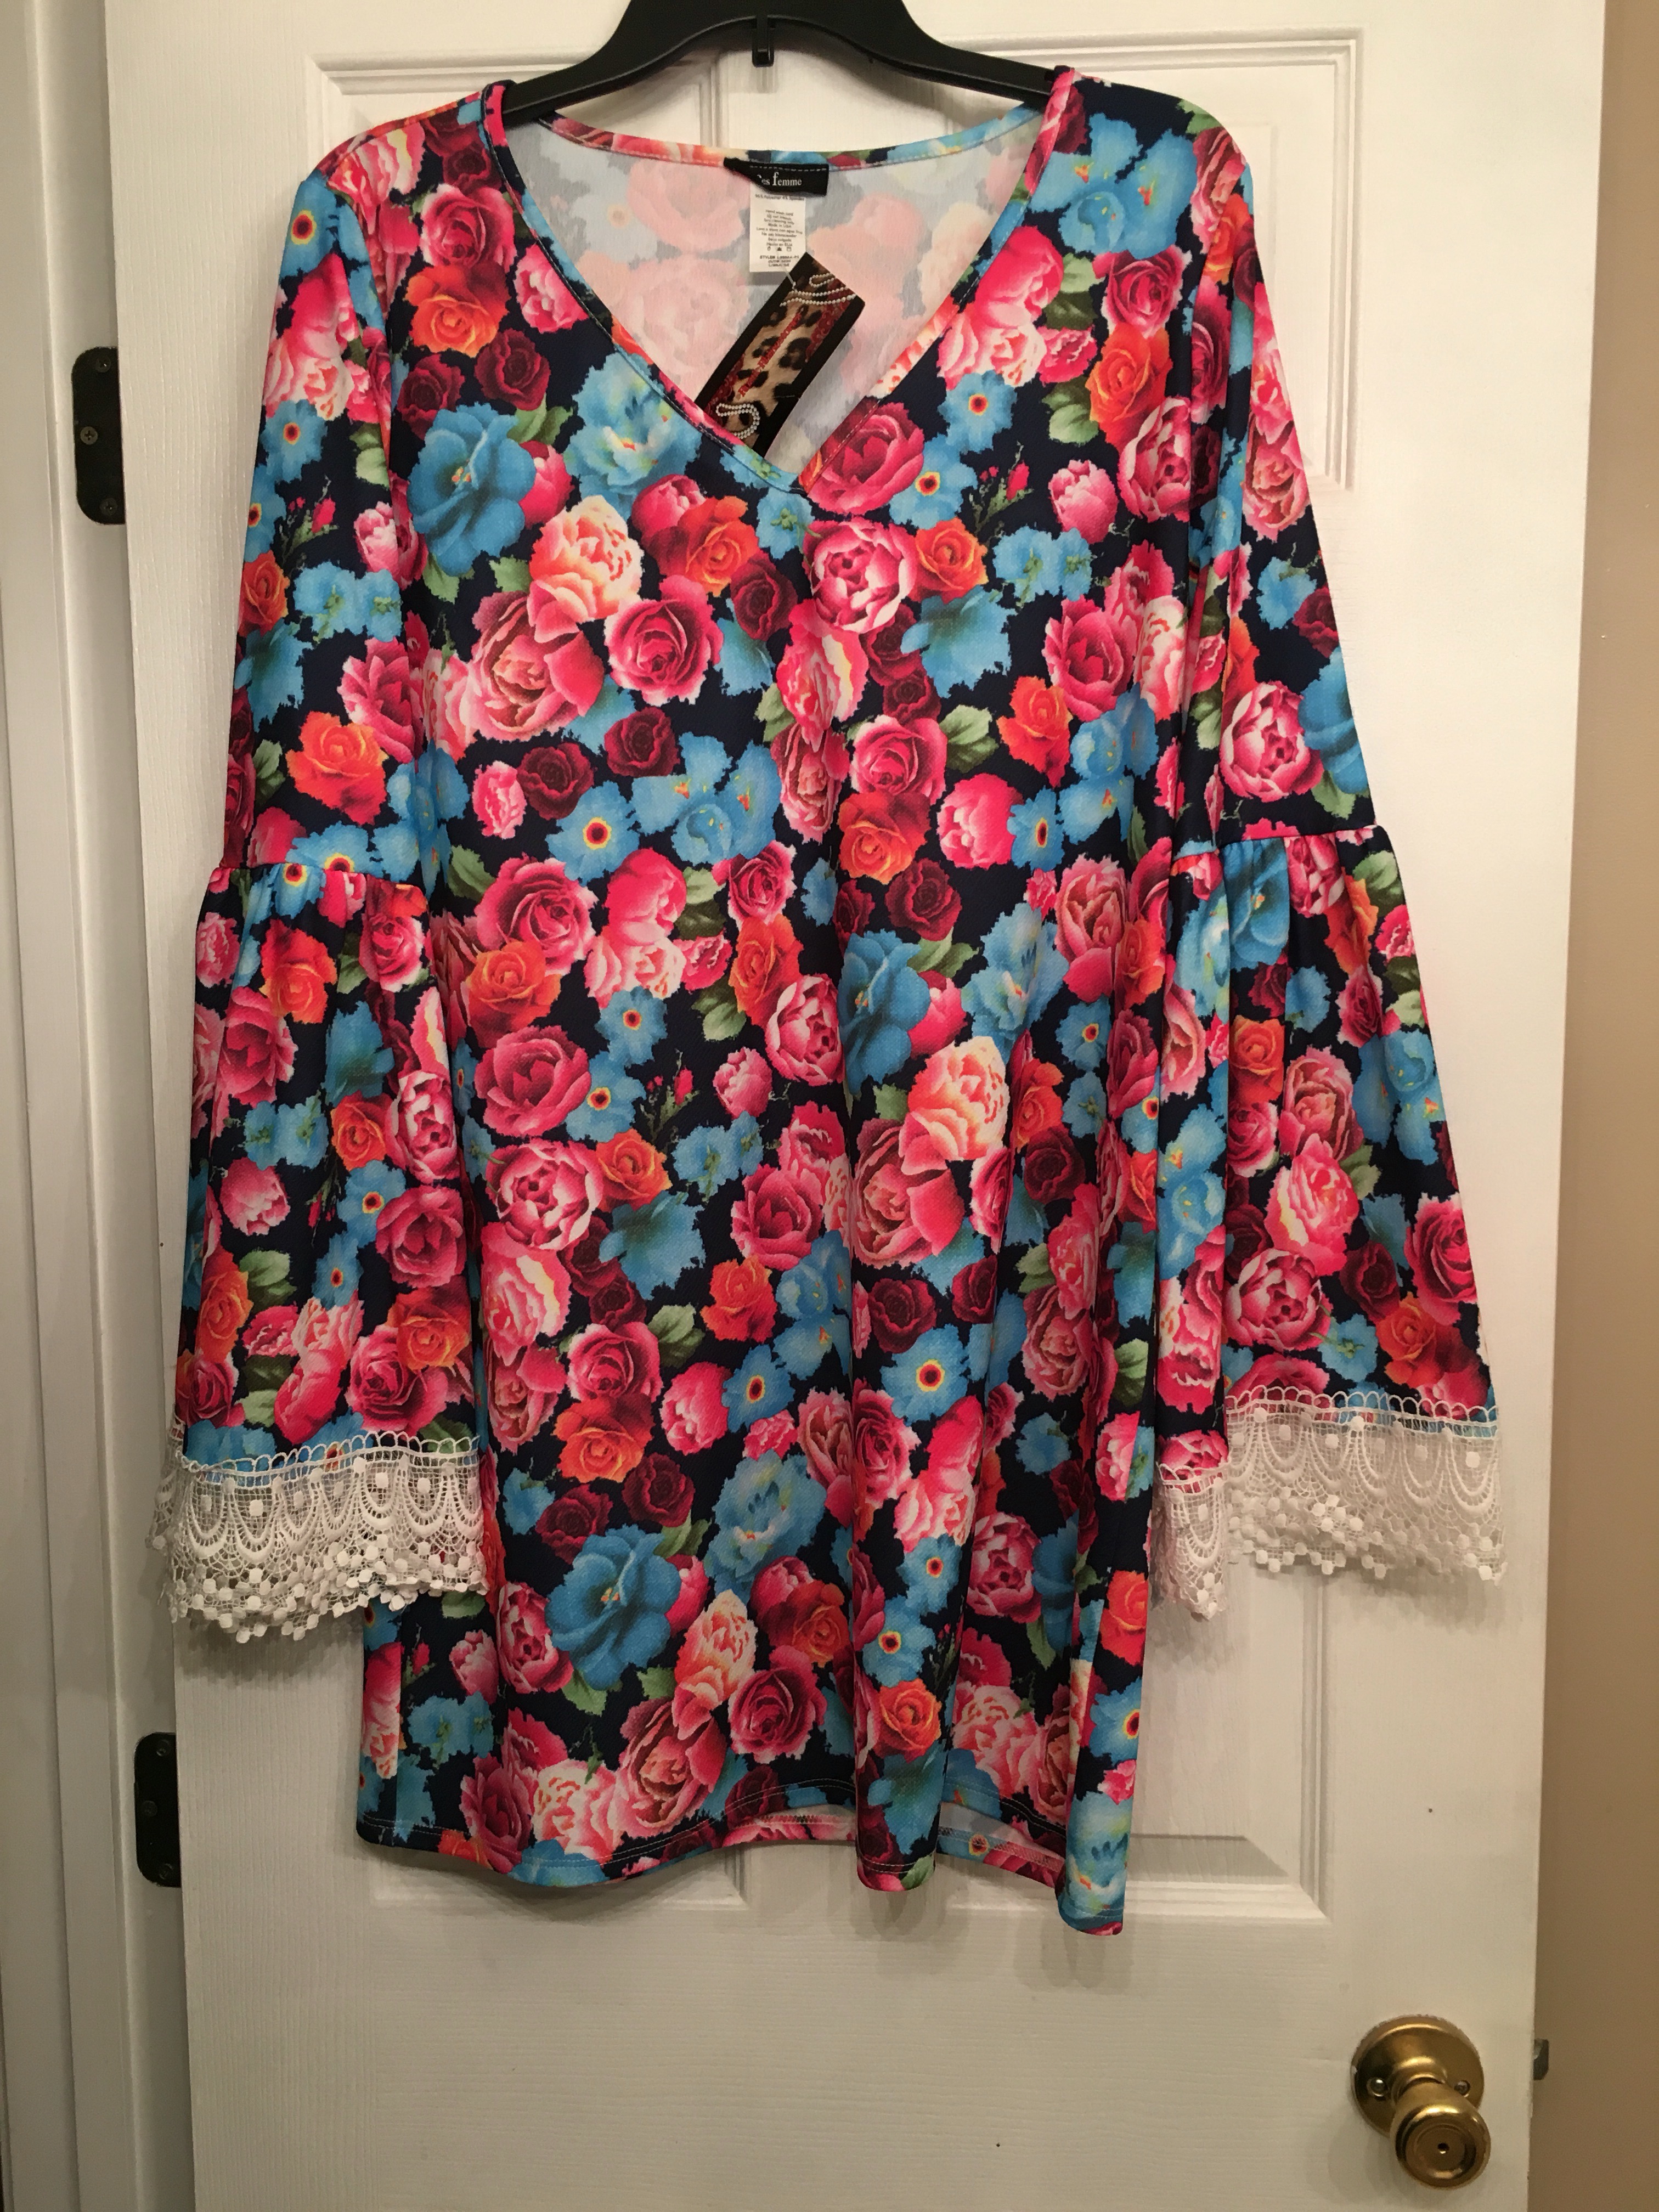 Rustic Rhinestones Boutique Review | Natty's Reviews